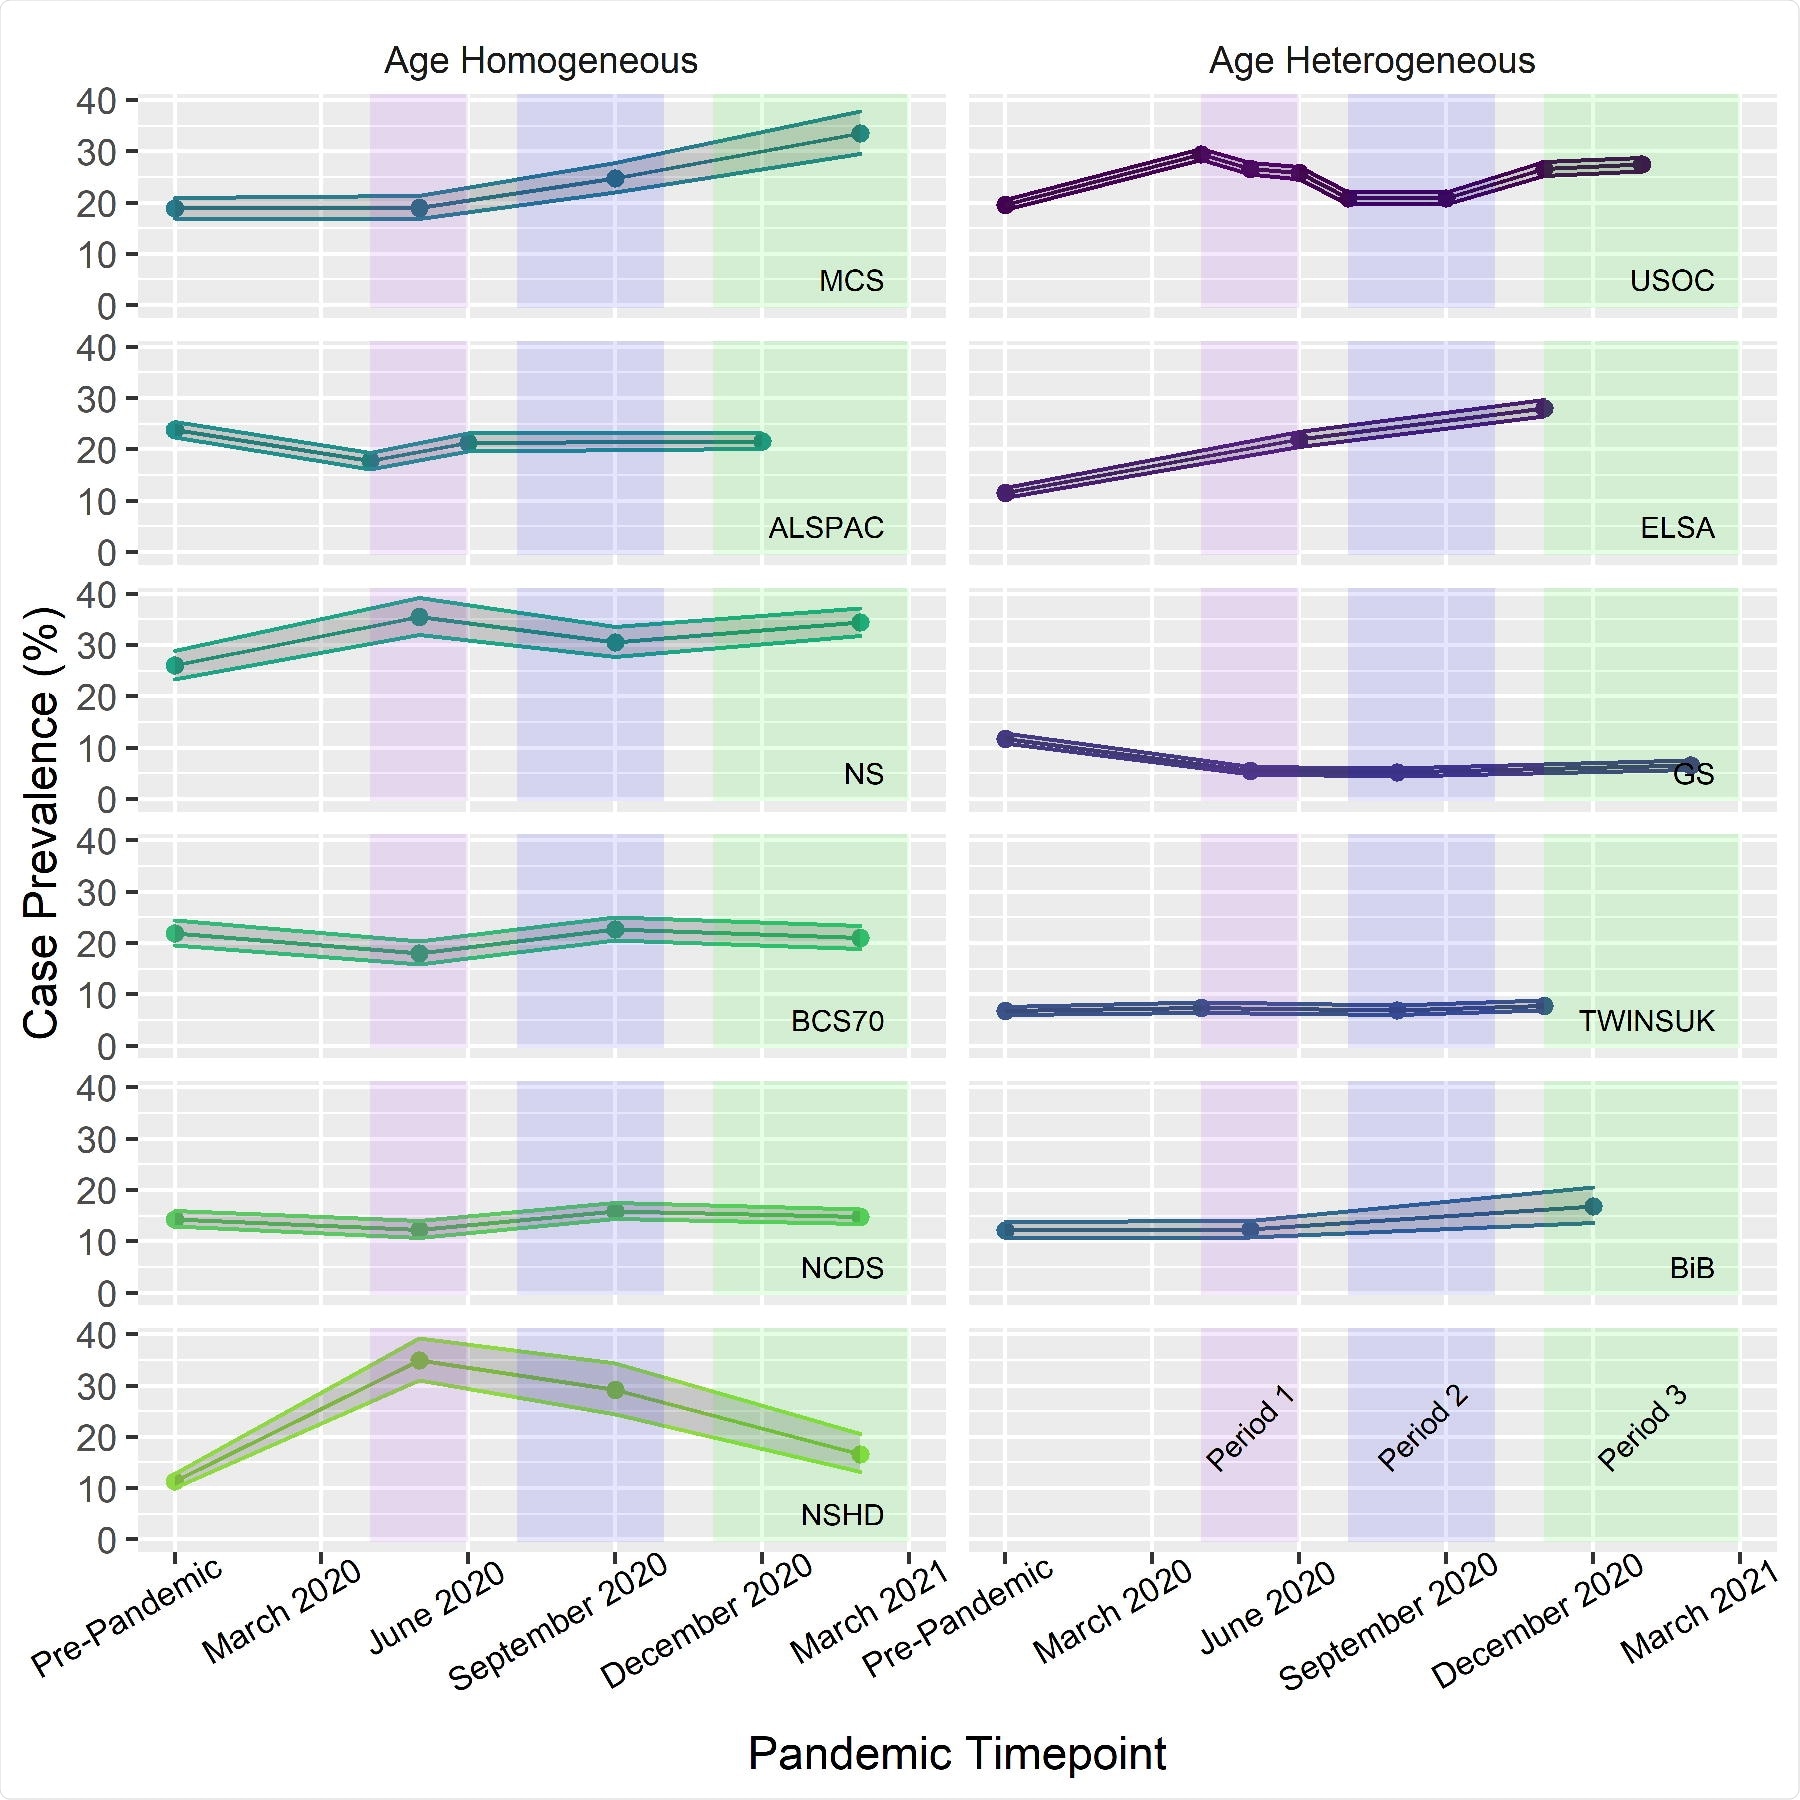 Trends in overall prevalence of psychological distress within each of the 11 longitudinal studies analysed in this paper, as defined by measure-specific thresholds. Coloured boxes indicate the time period groupings used for analysis in this paper.